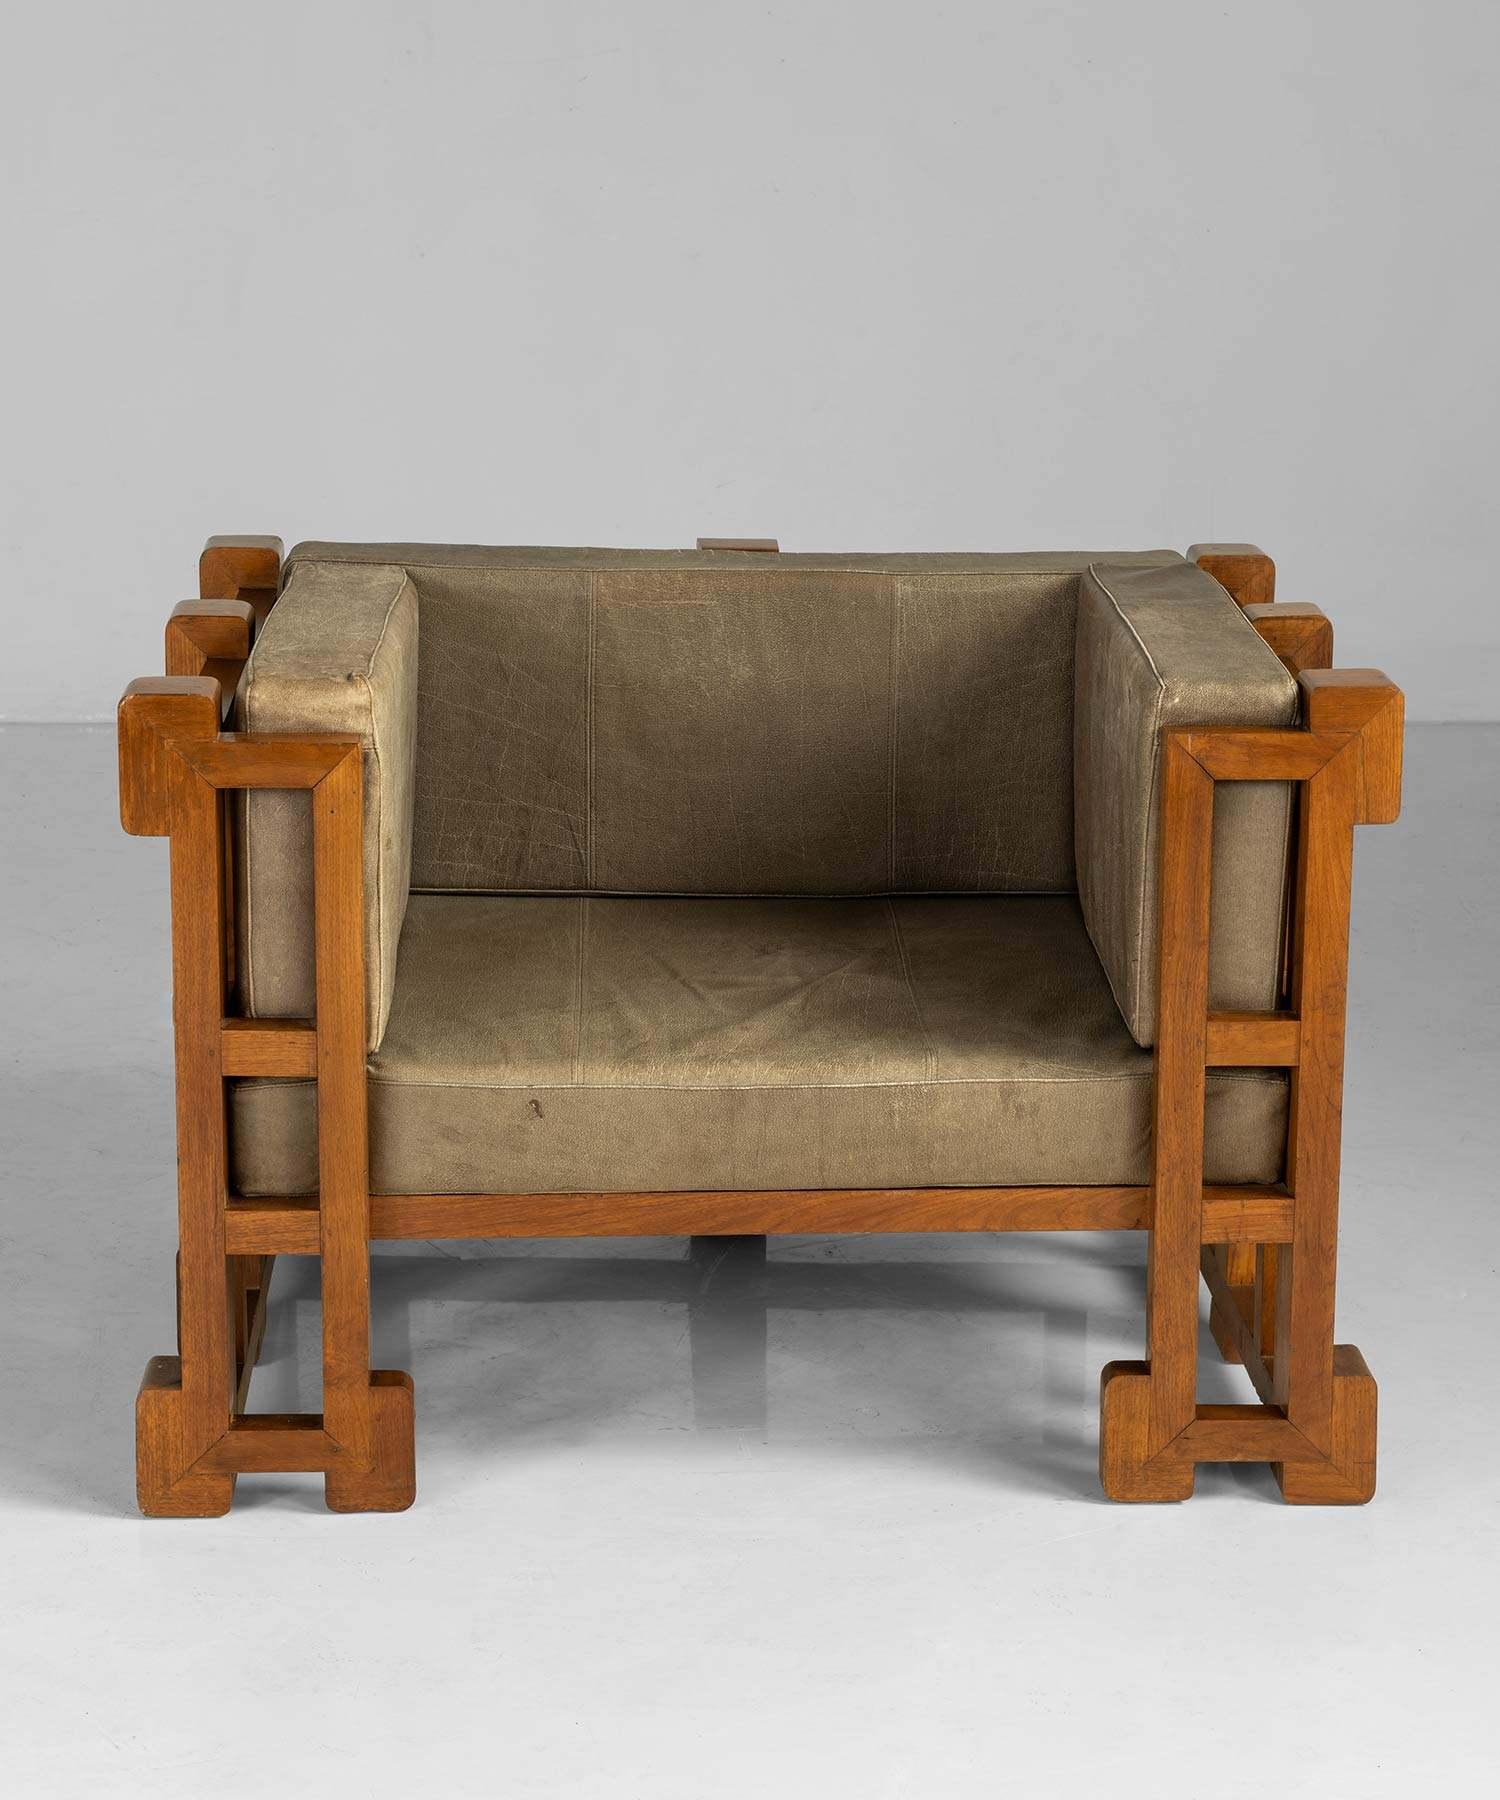 20th Century Cubist Leather Chairs, France, Circa 1970